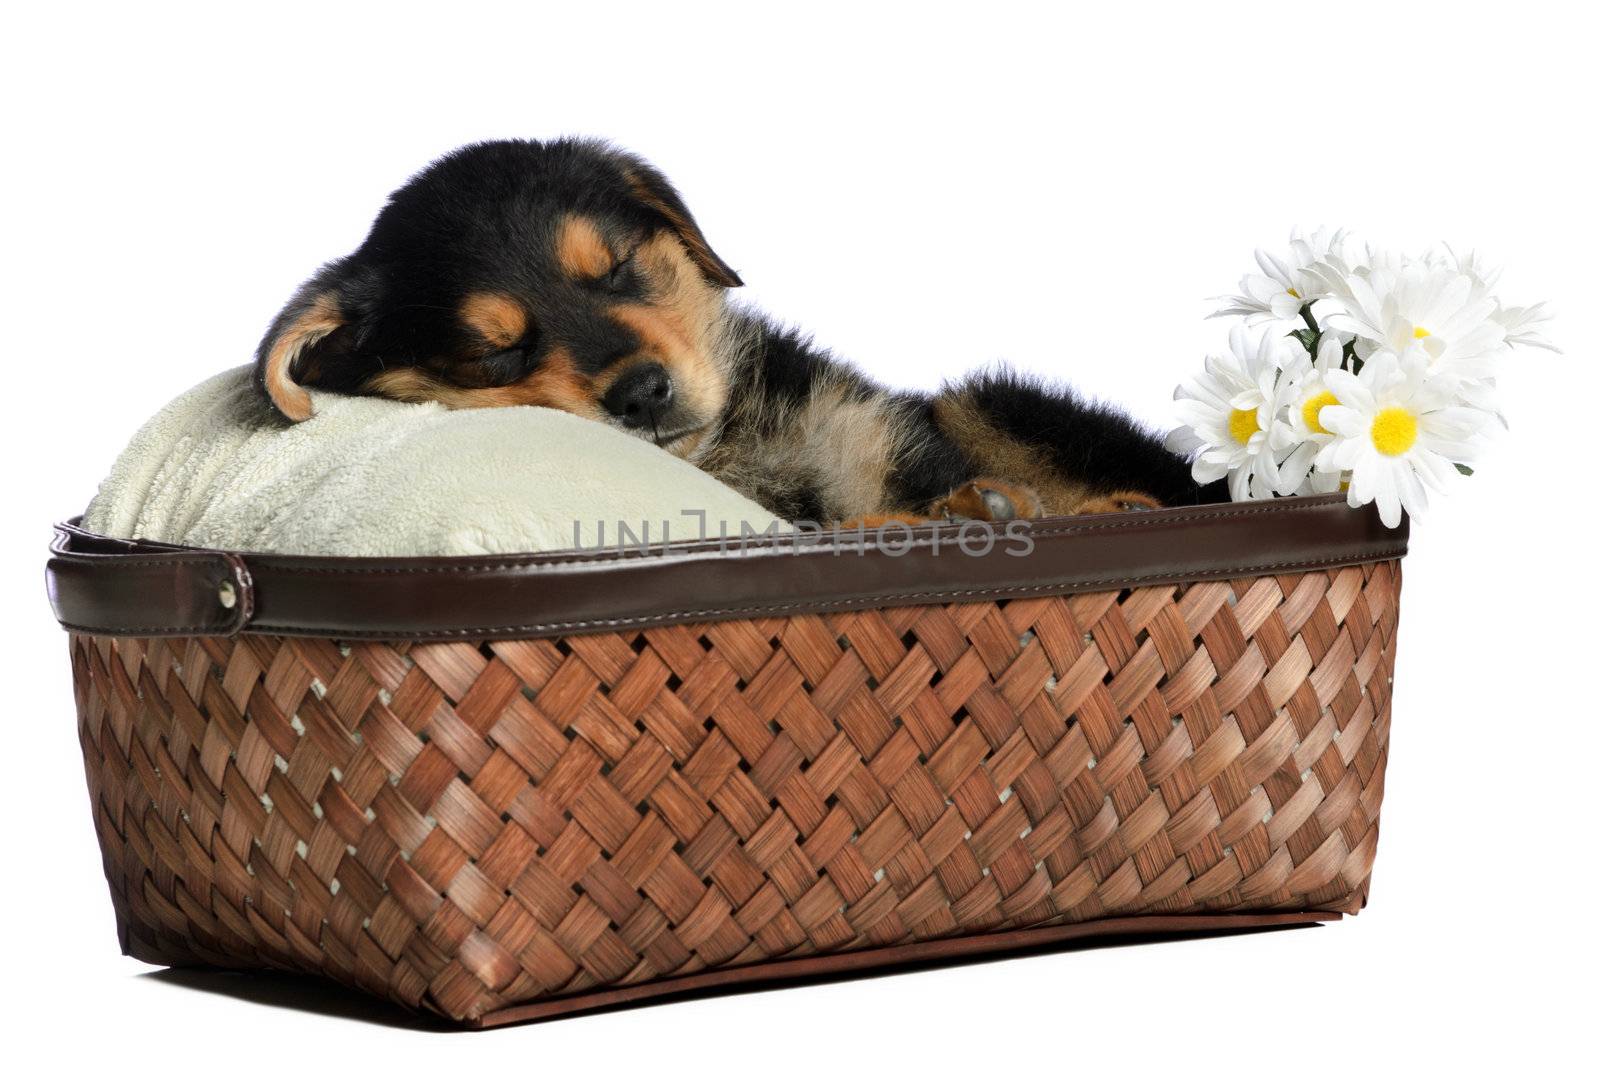 A sleeping puppy is having a nap in a basket, isolated against a white background.